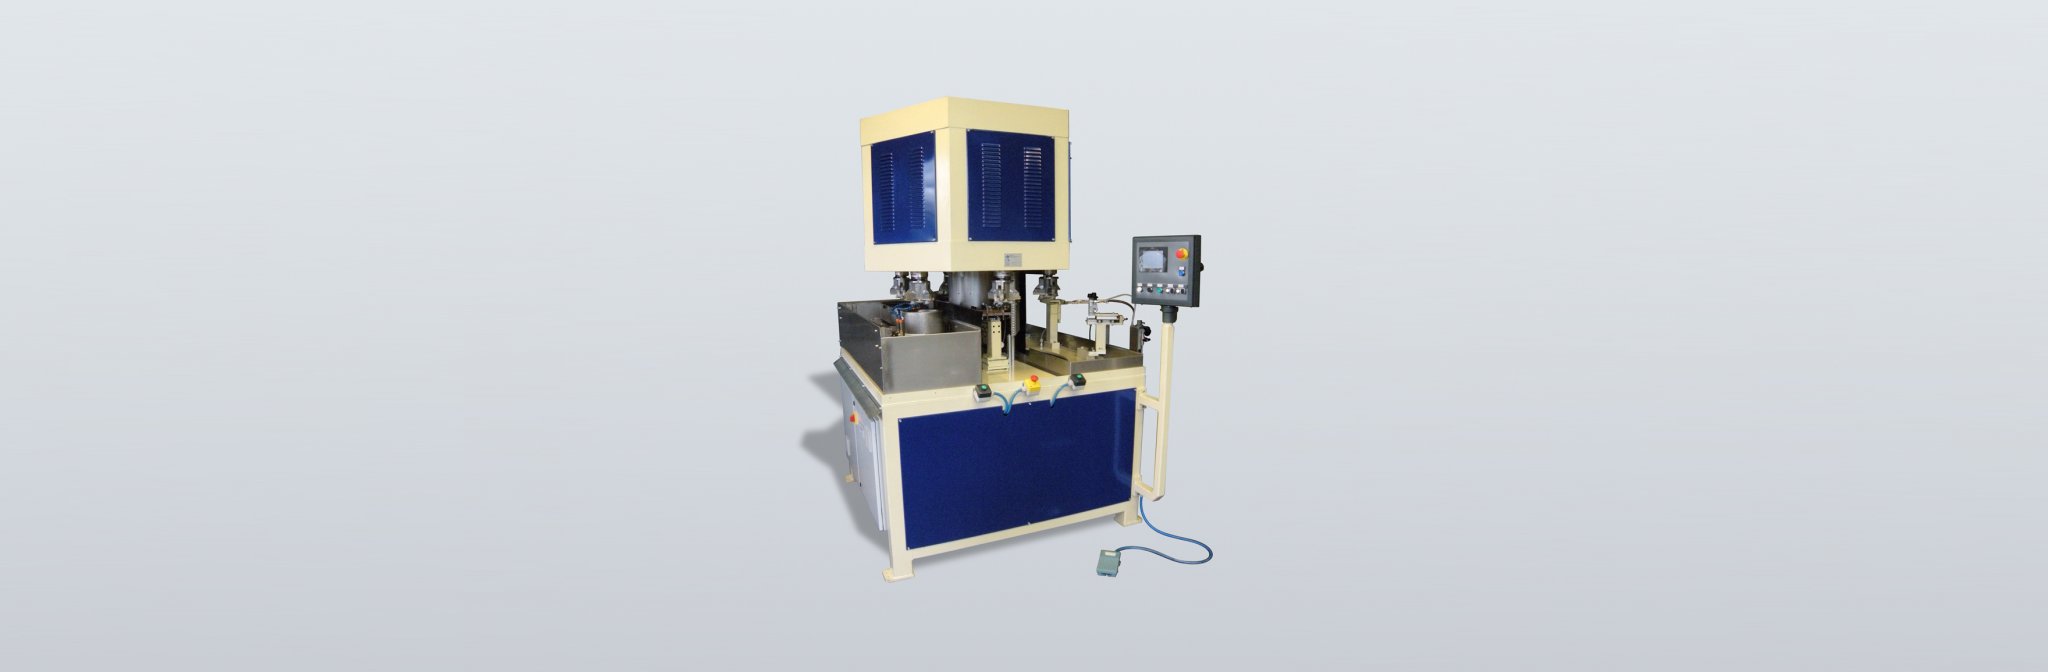 Transfer machines for glass processing.